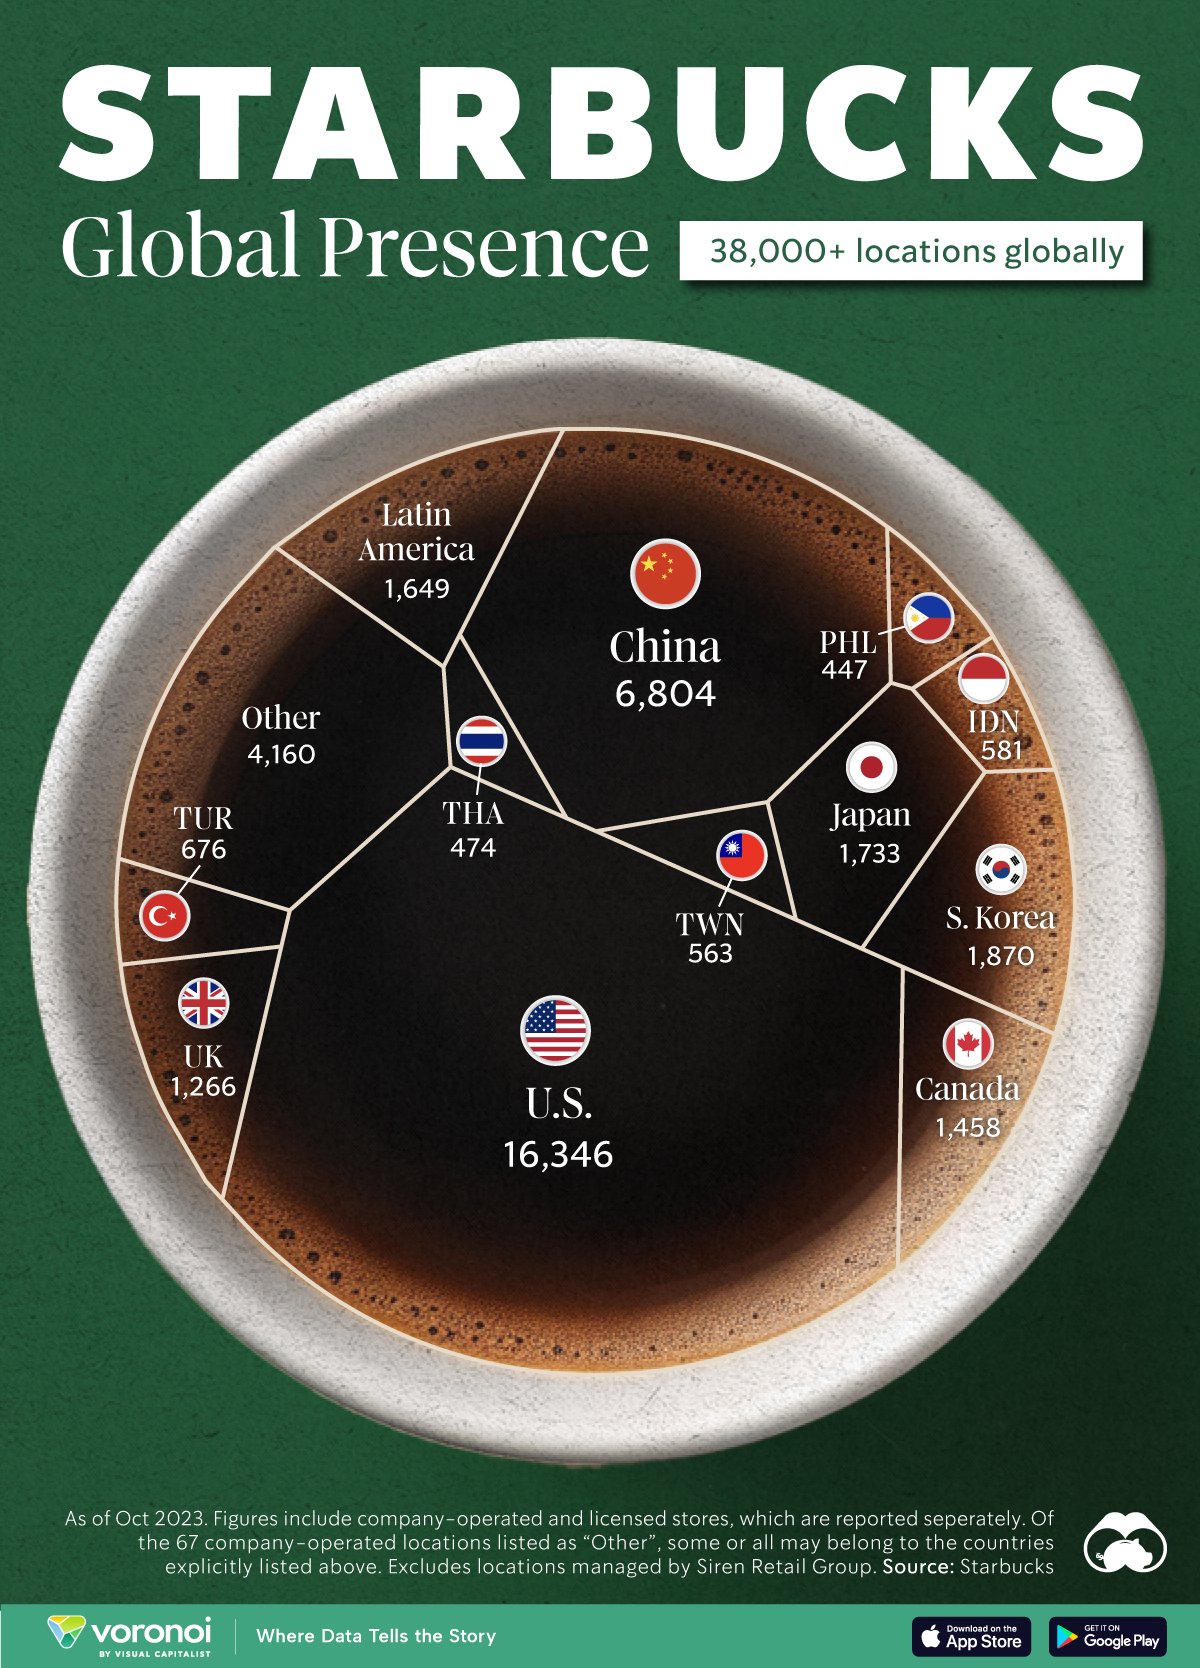 Chartered Which Countries Have The Most Starbucks Stores?